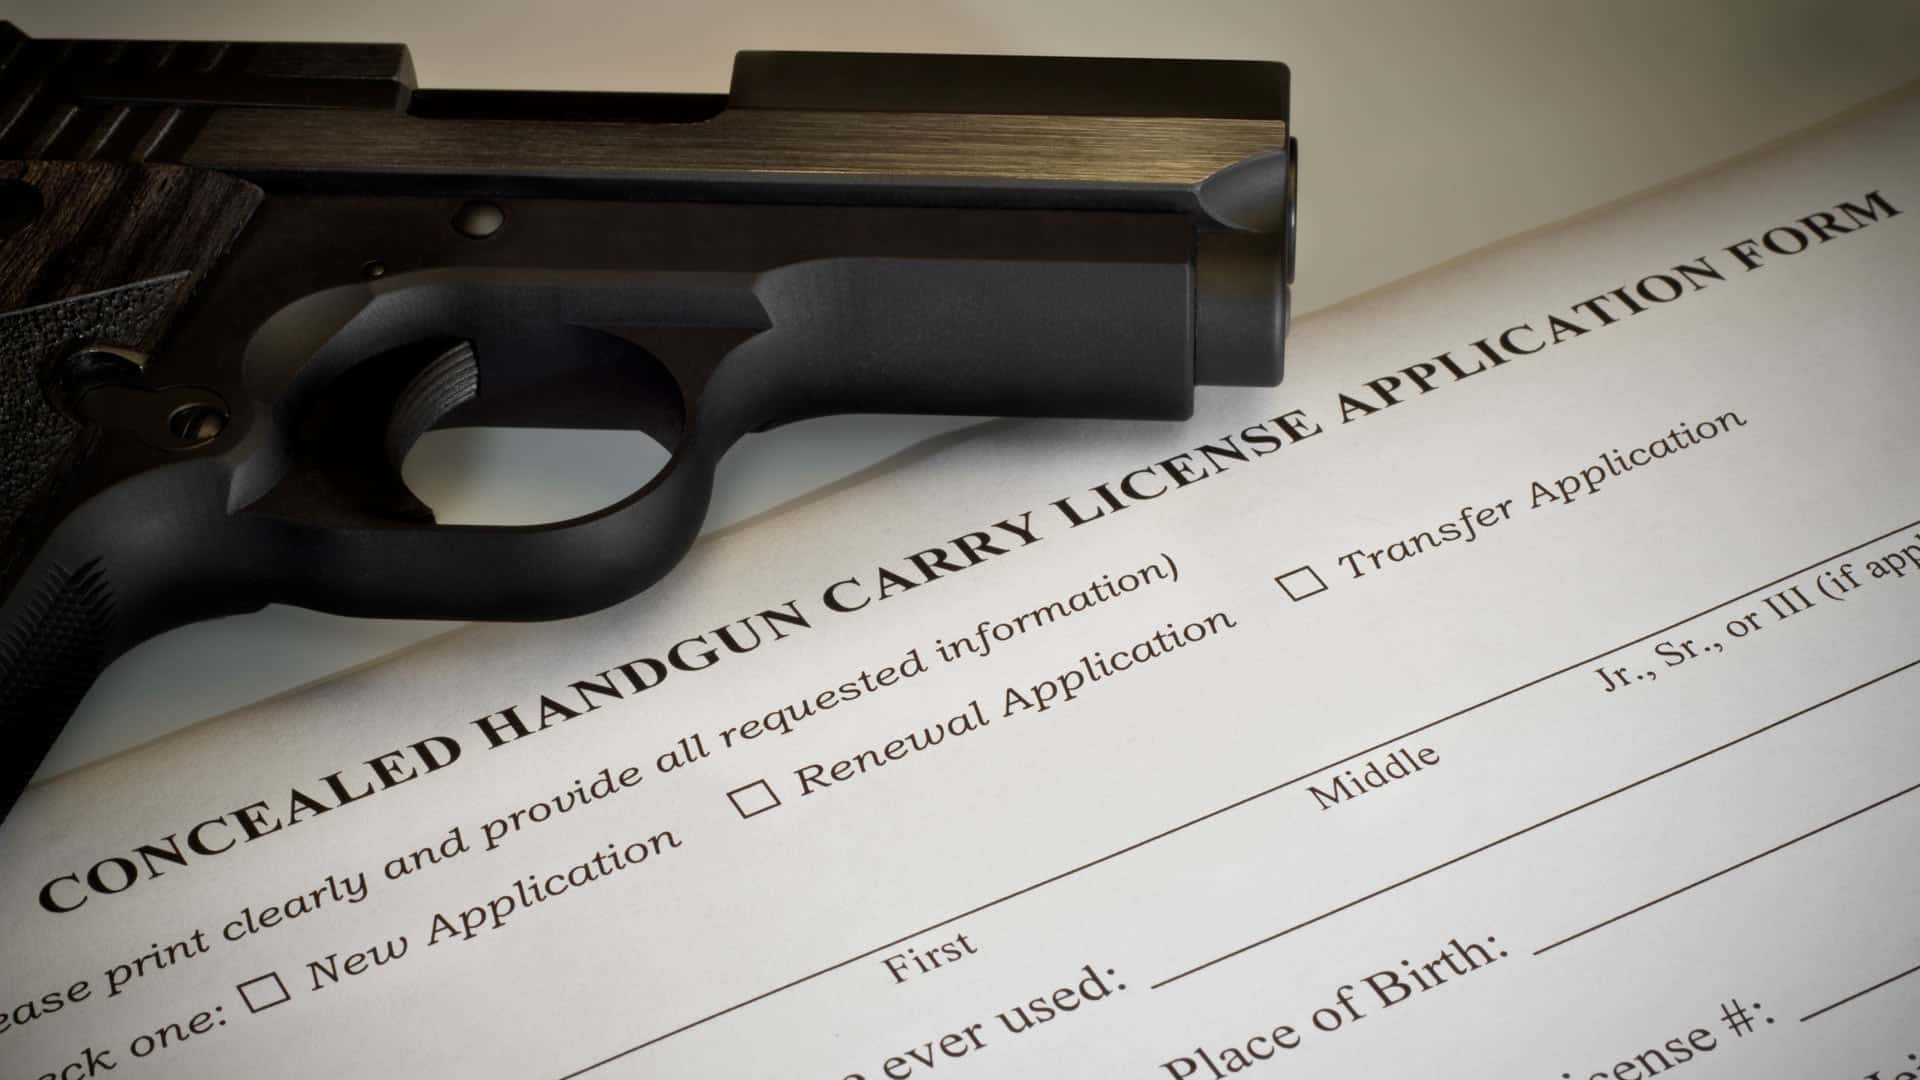 How To Get Firearm Permit For Home Defense